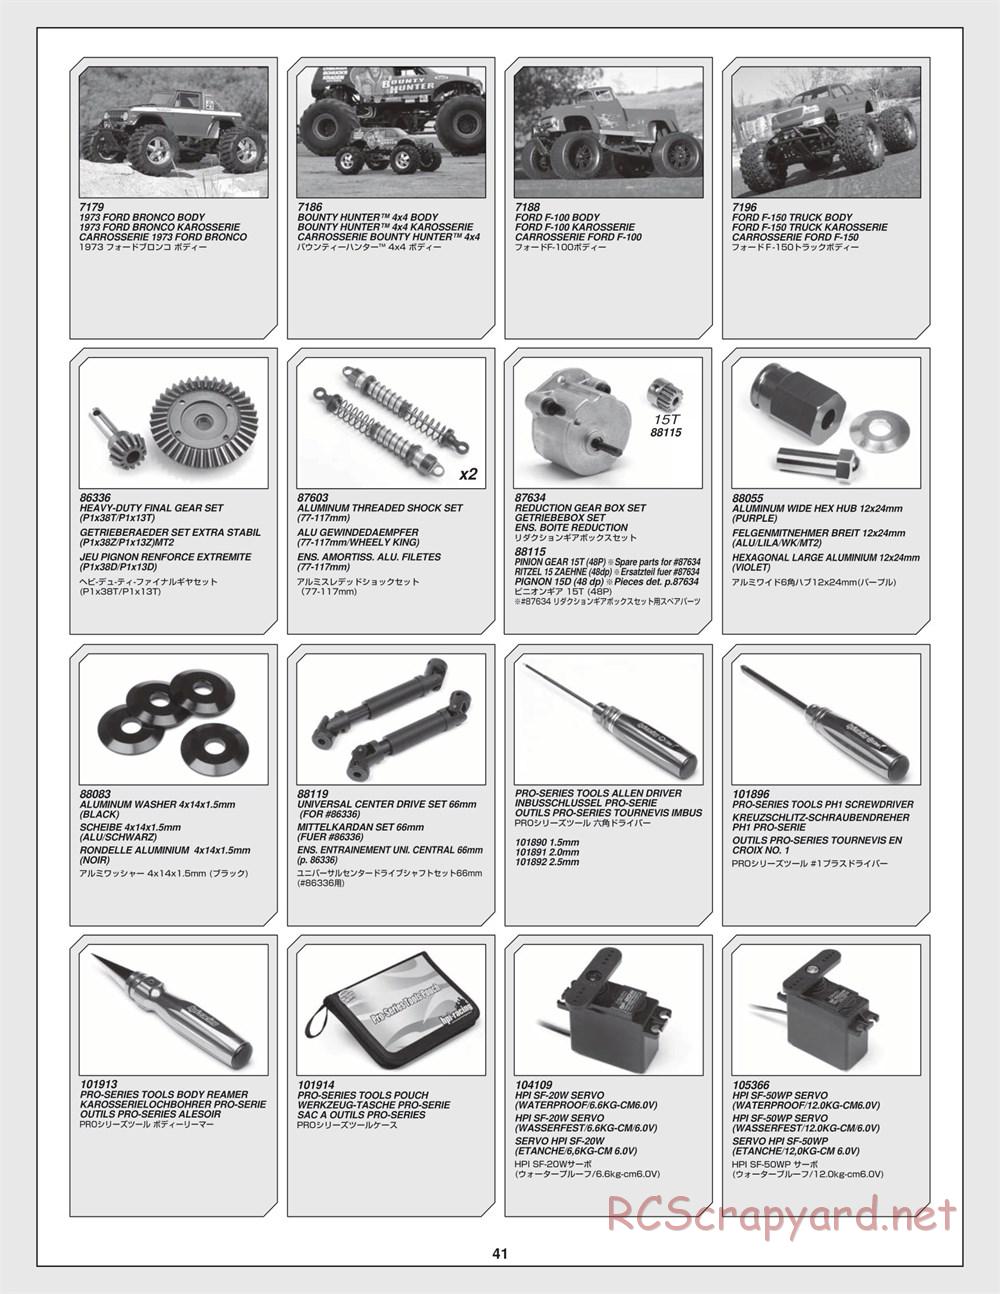 HPI - Crawler King - Exploded View - Page 41